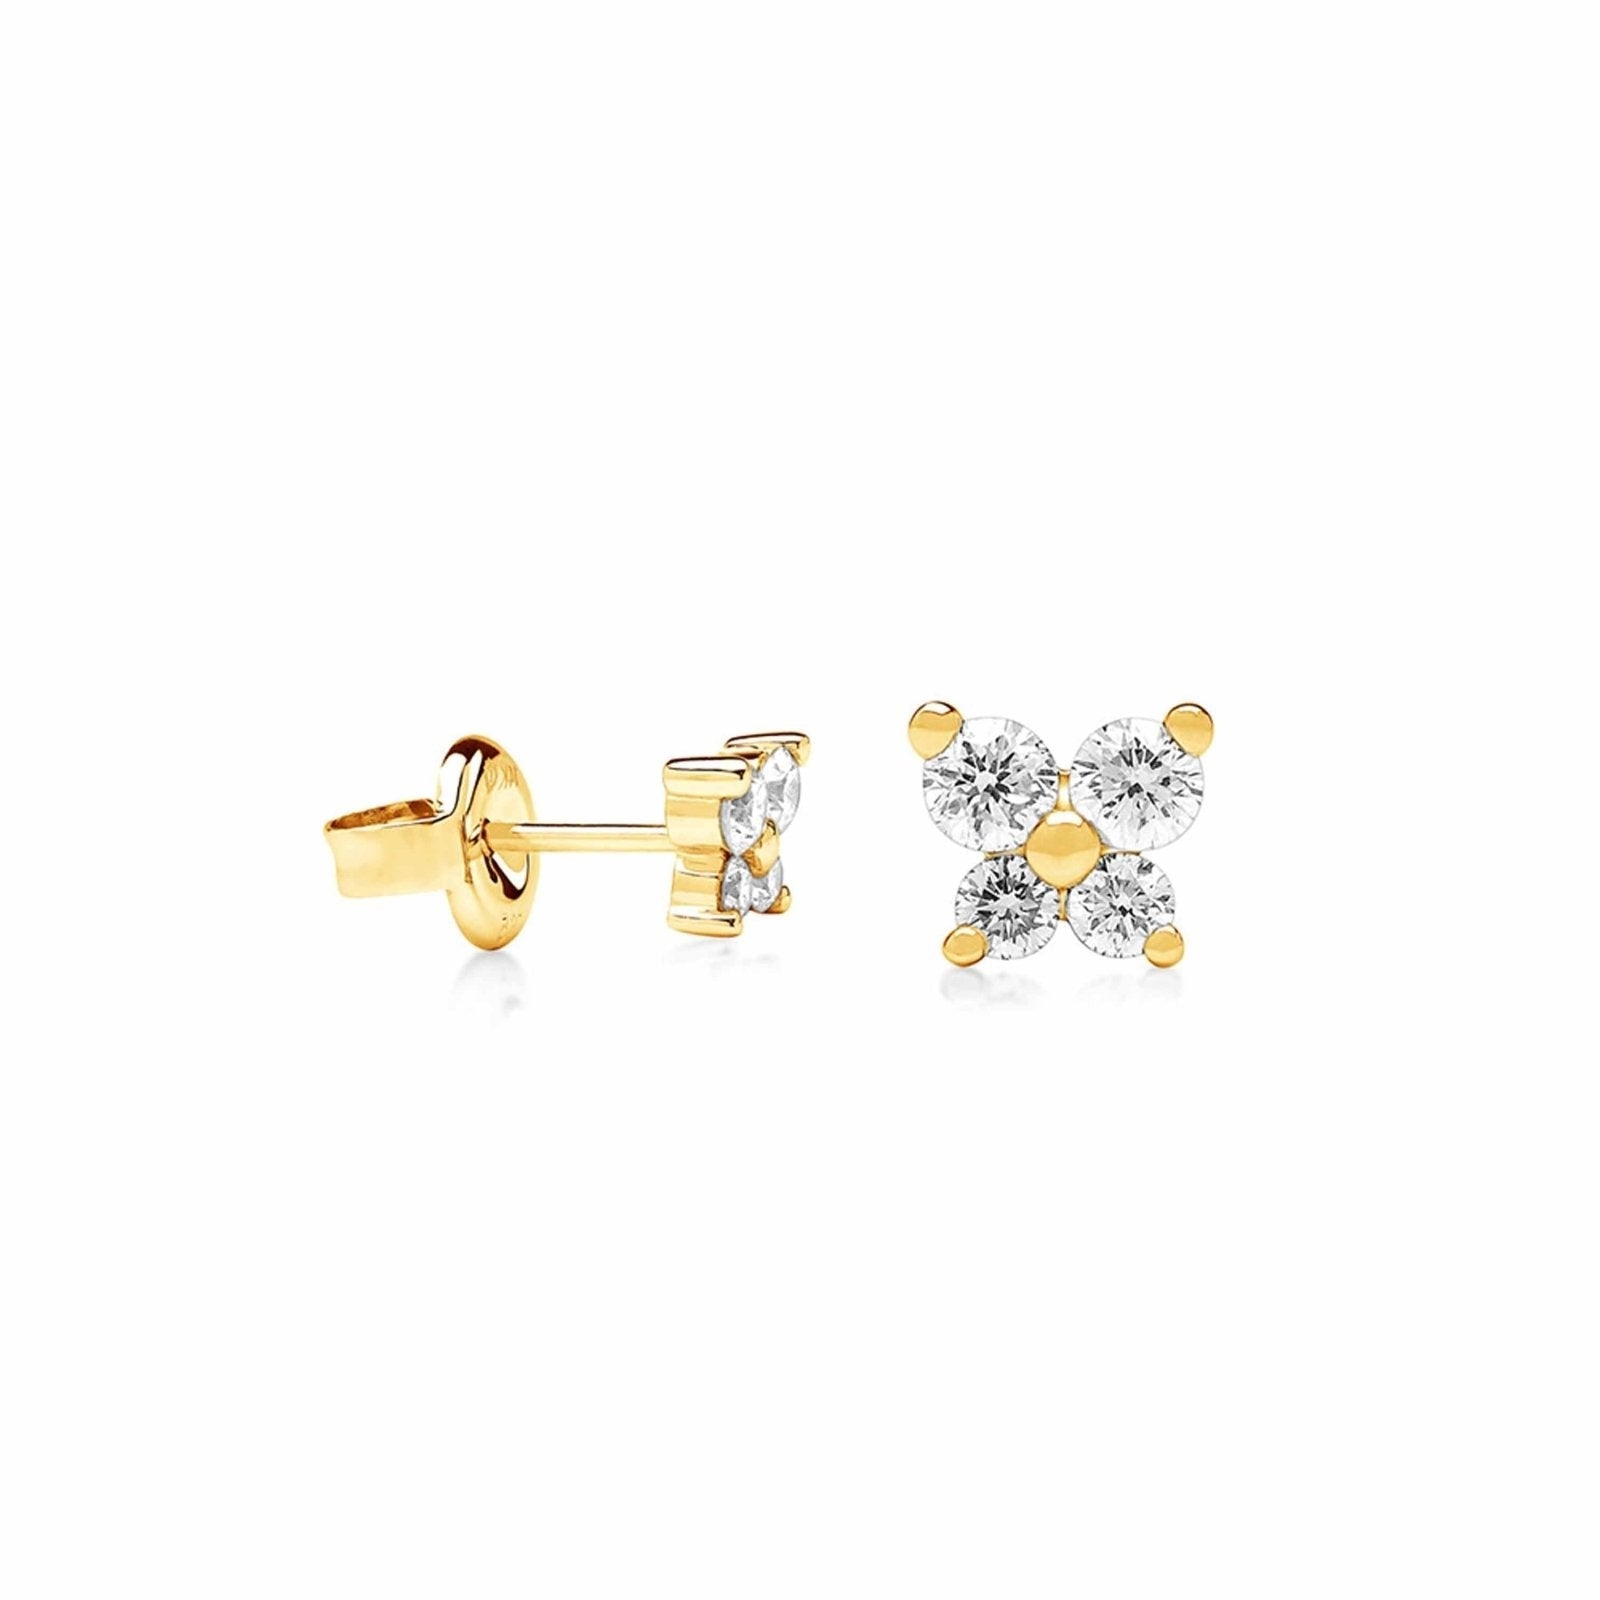 Linea - Nature Inspired Diamond Stud Earring in Solid Gold Earrings Estella Collection #product_description# 17561 14k Birthstone Birthstone Earrings #tag4# #tag5# #tag6# #tag7# #tag8# #tag9# #tag10#